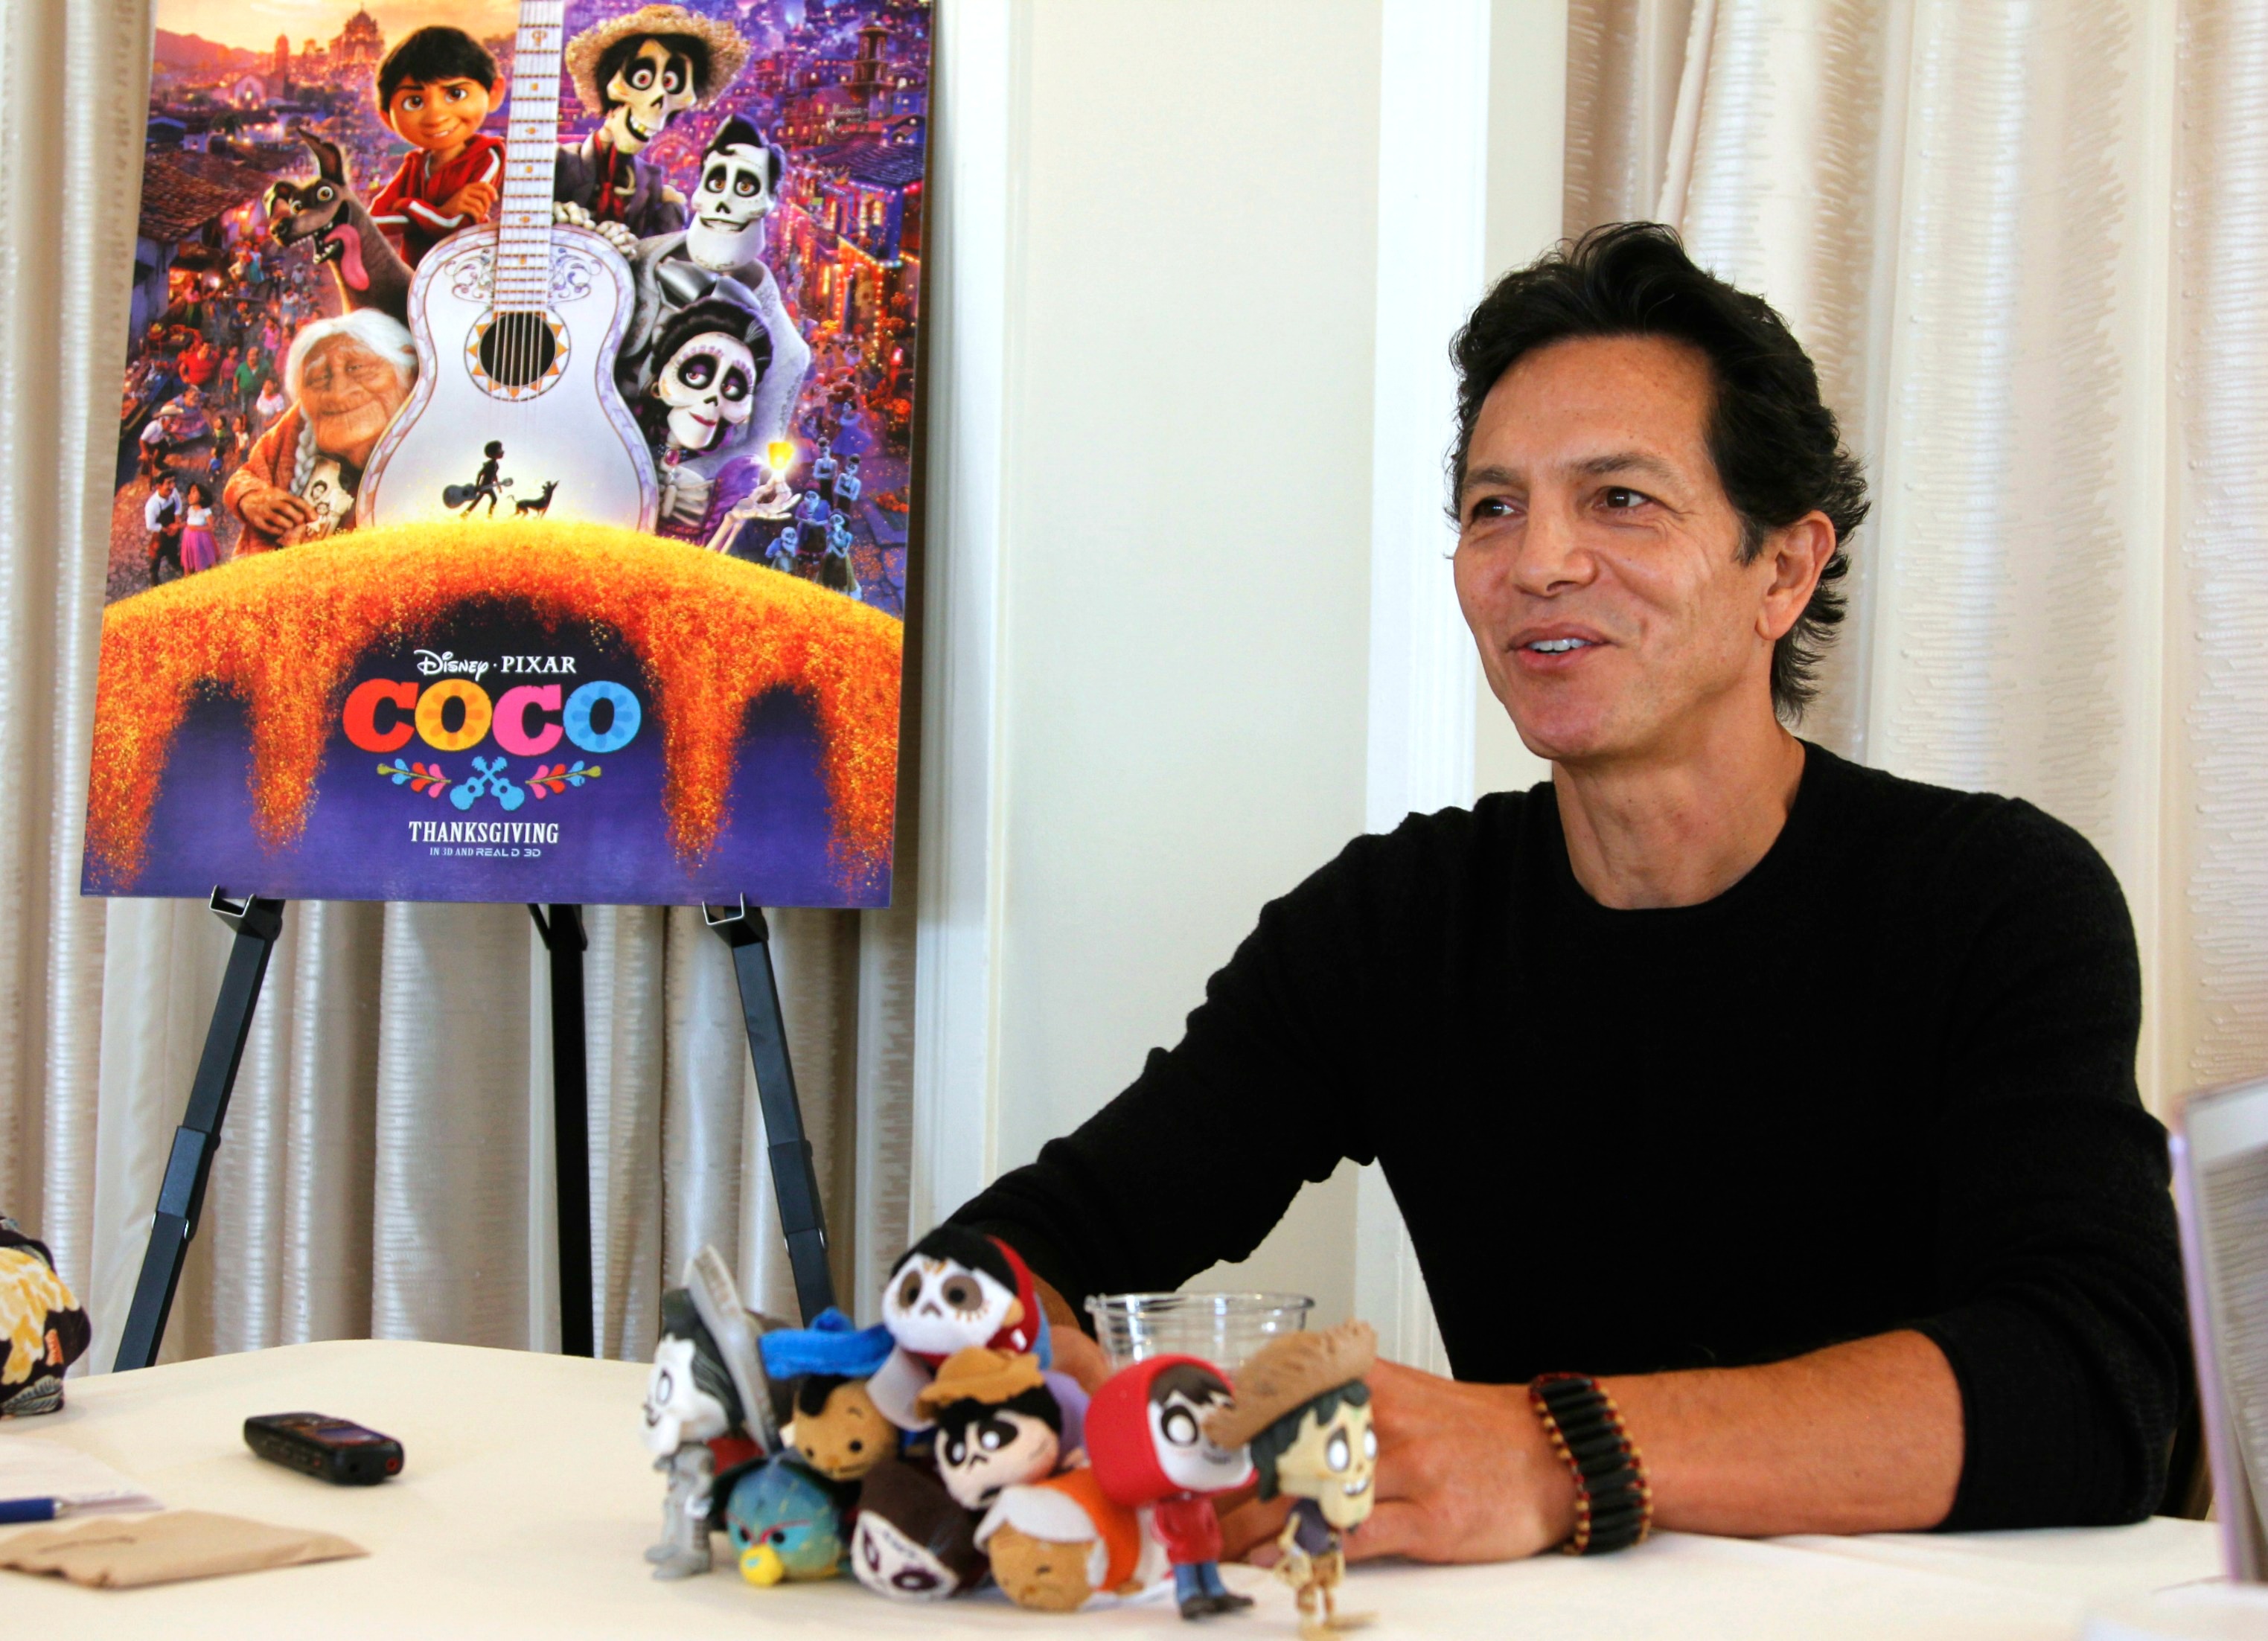 Chatting with Benjamin Bratt about Coco